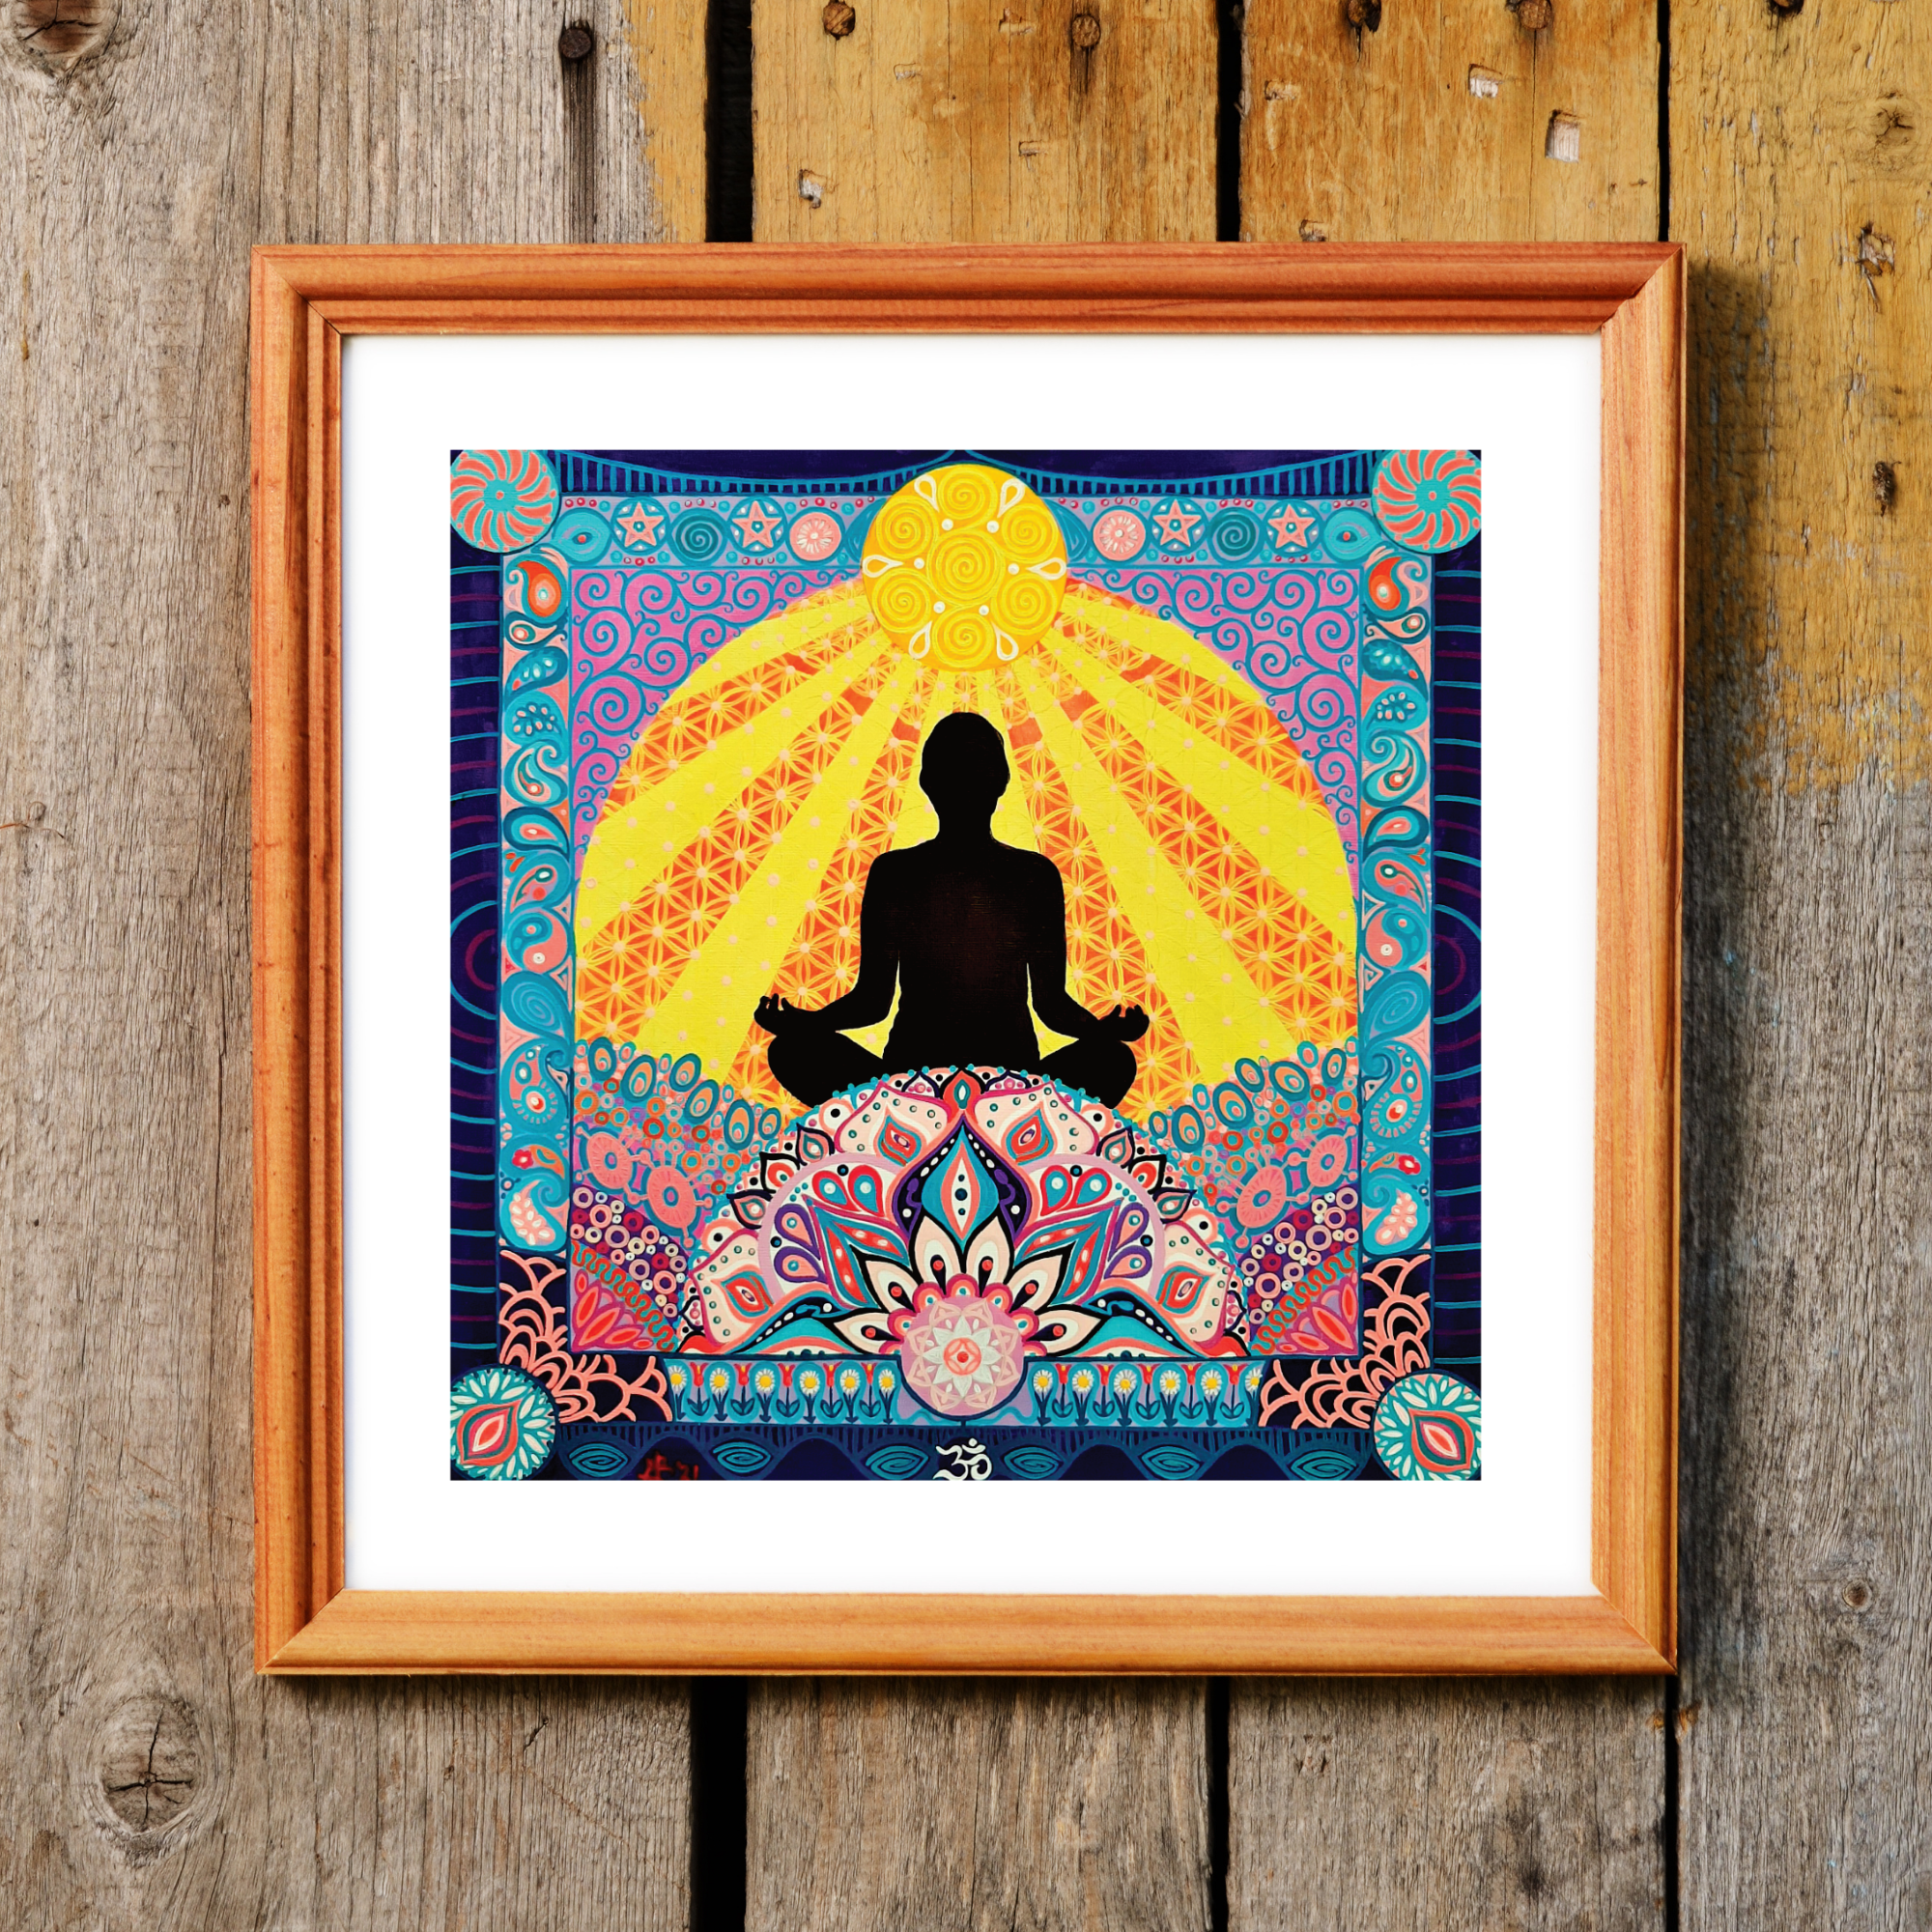 Colourful meditating buddha art print, download and print at home, in a wood effect frame (not included).